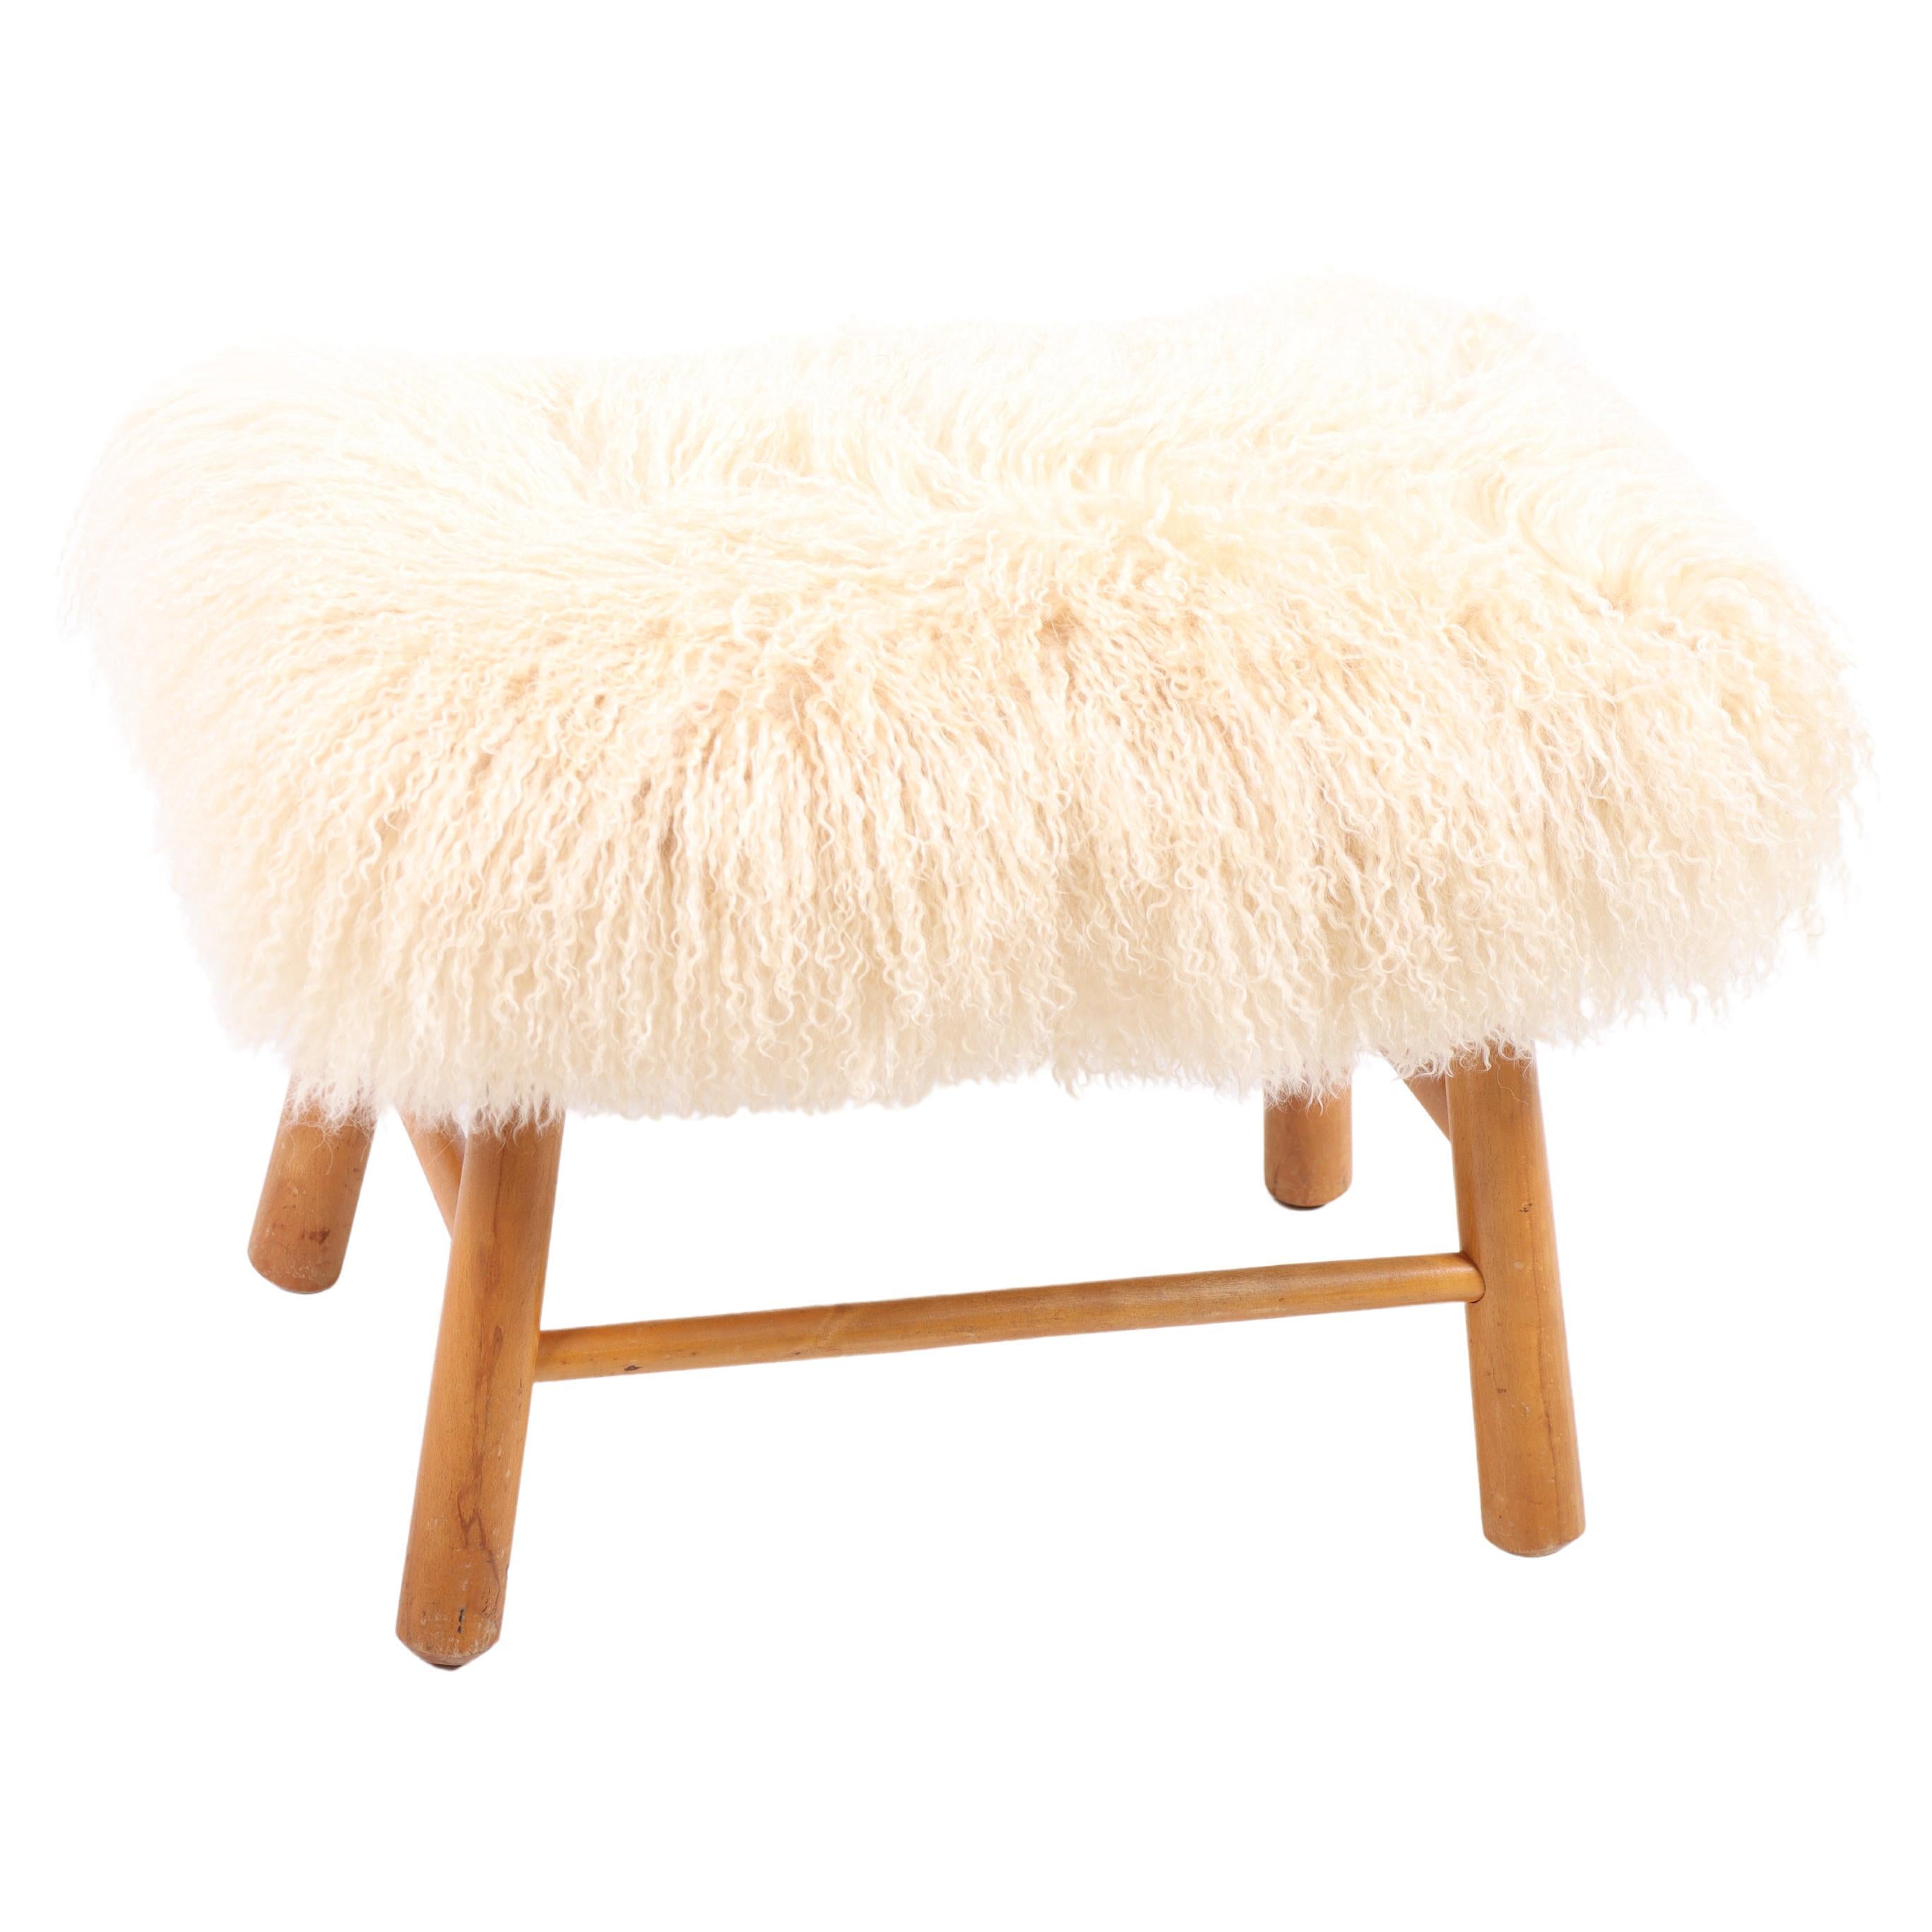 Danish Stool with Sheepskin, Made in Denmark 1940s For Sale